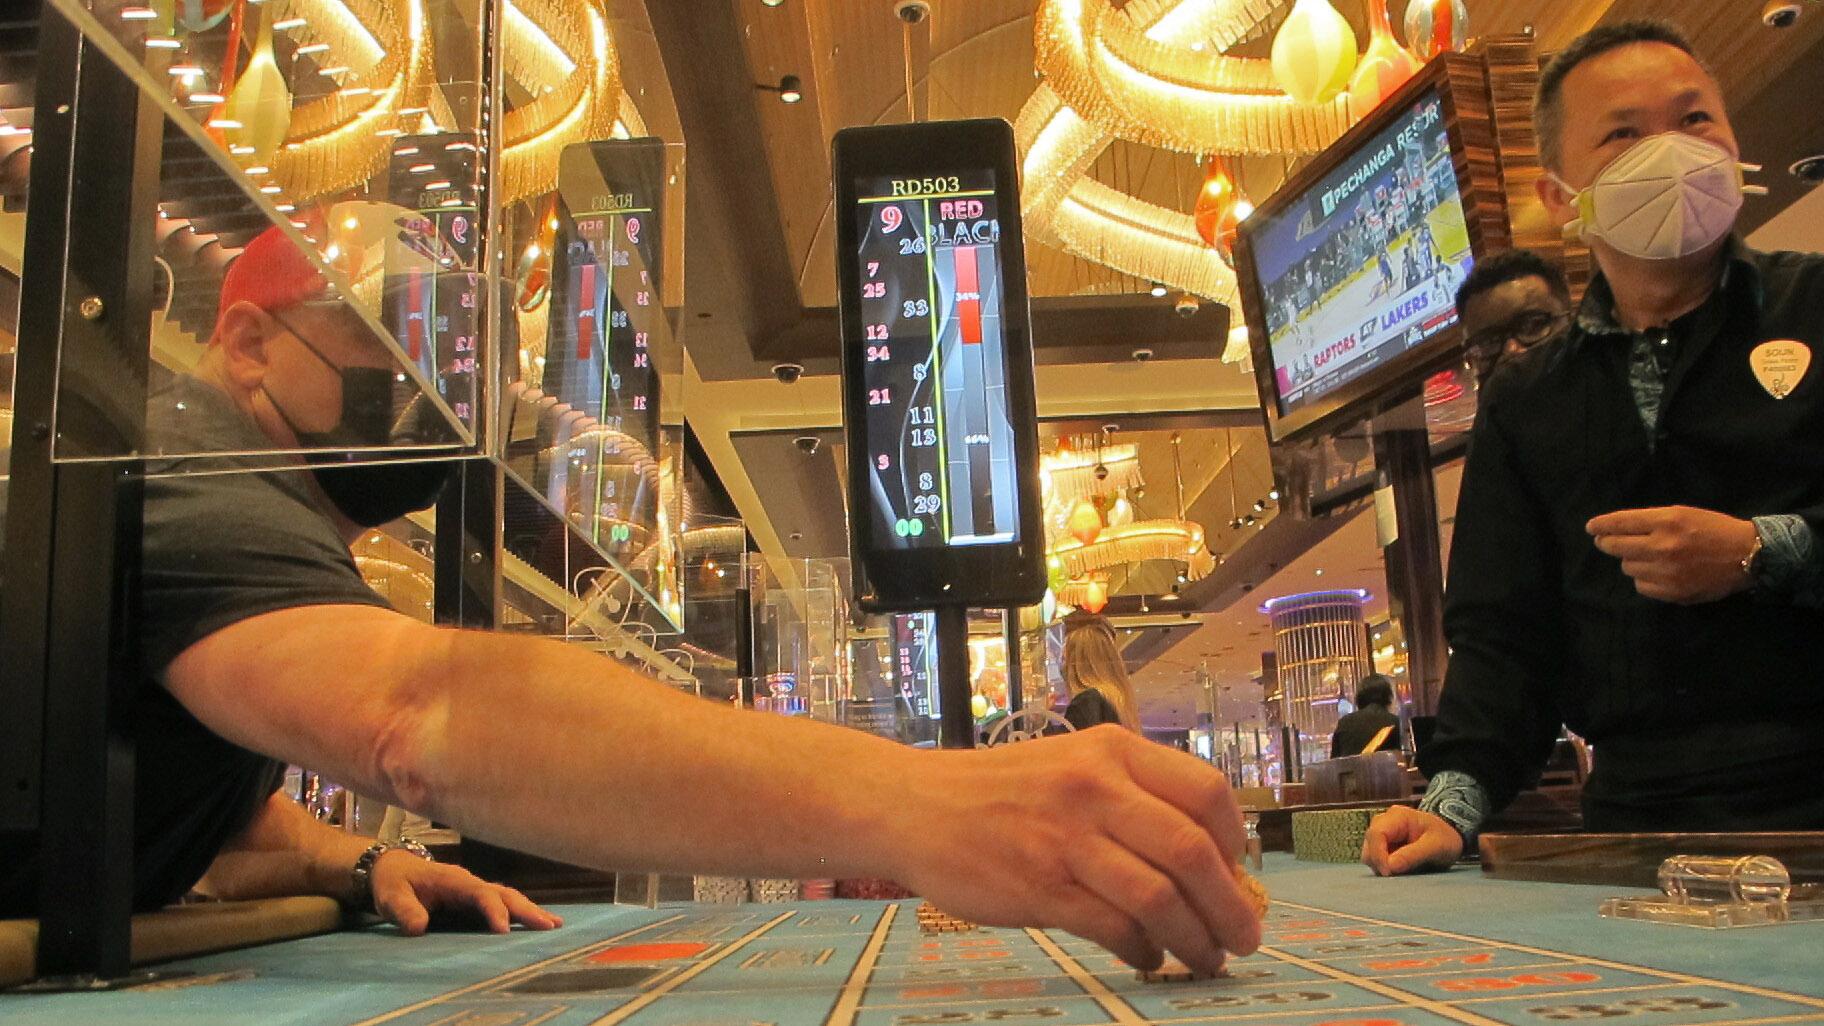 In this May 3, 2021 photo a game of roulette is under way in the Hard Rock casino in Atlantic City, N.J. (AP Photo / Wayne Parry)